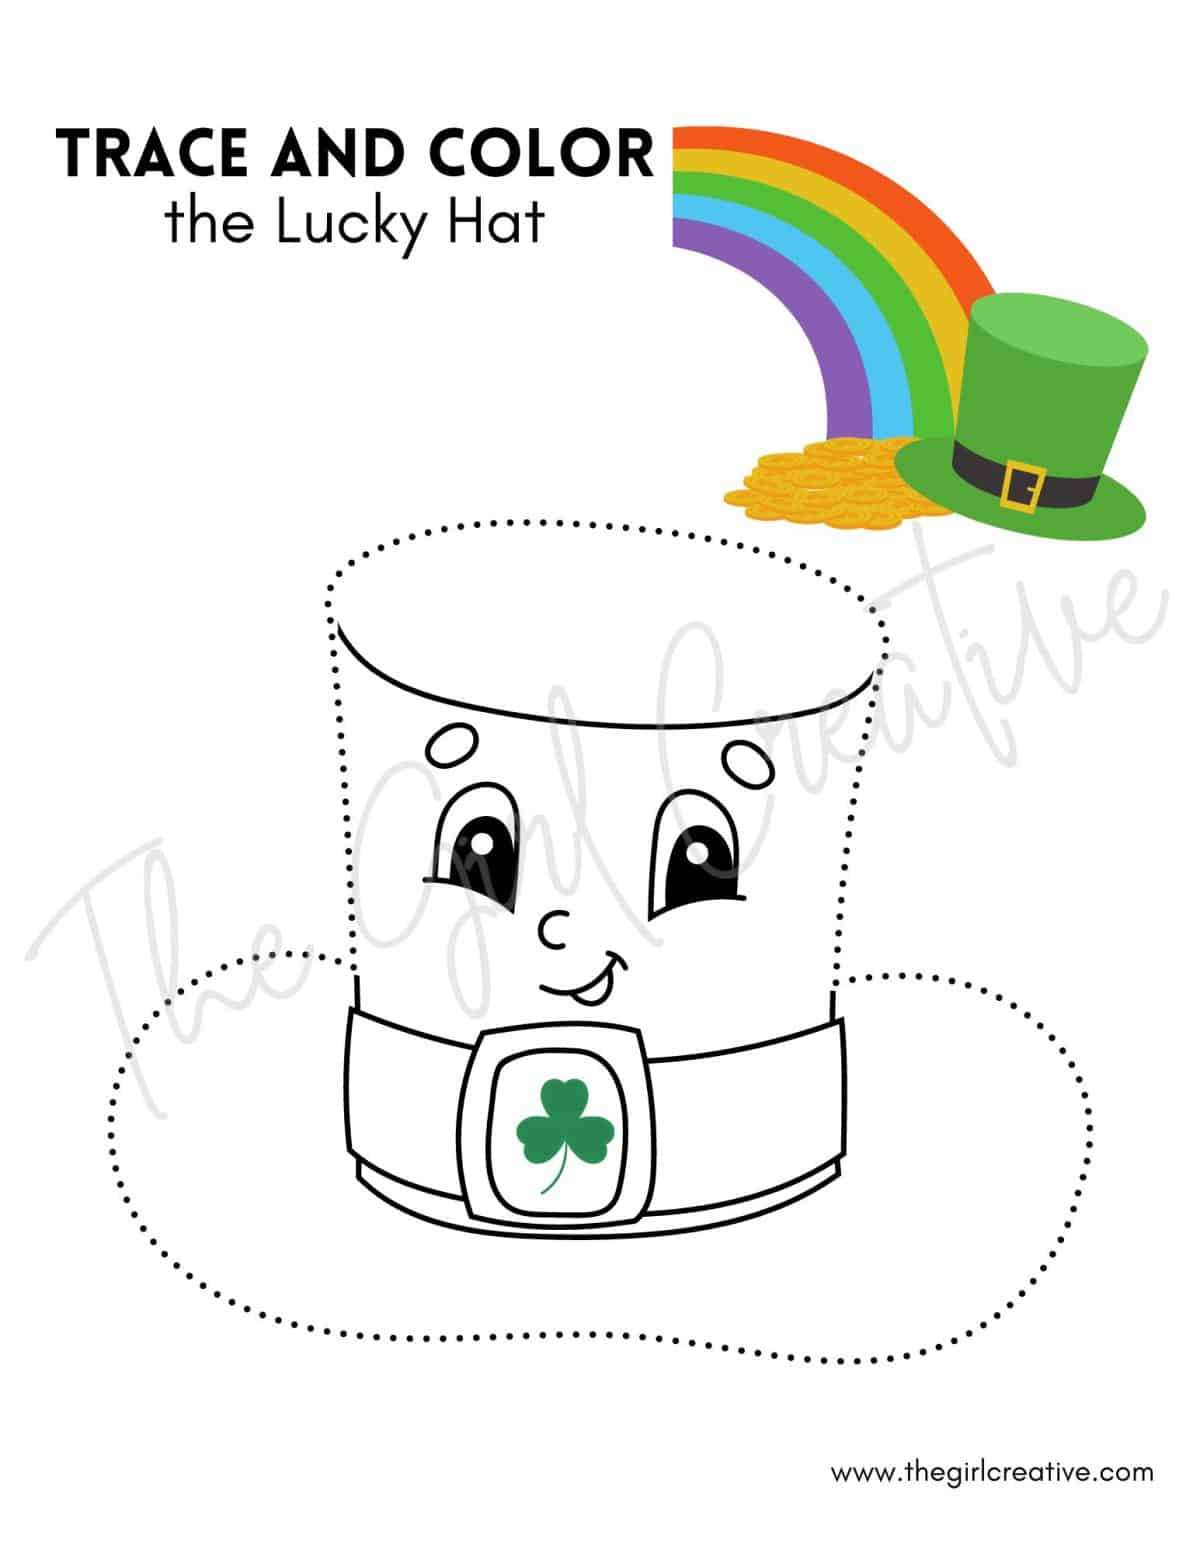 Lucky Hat coloring page for St. Patrick's Day